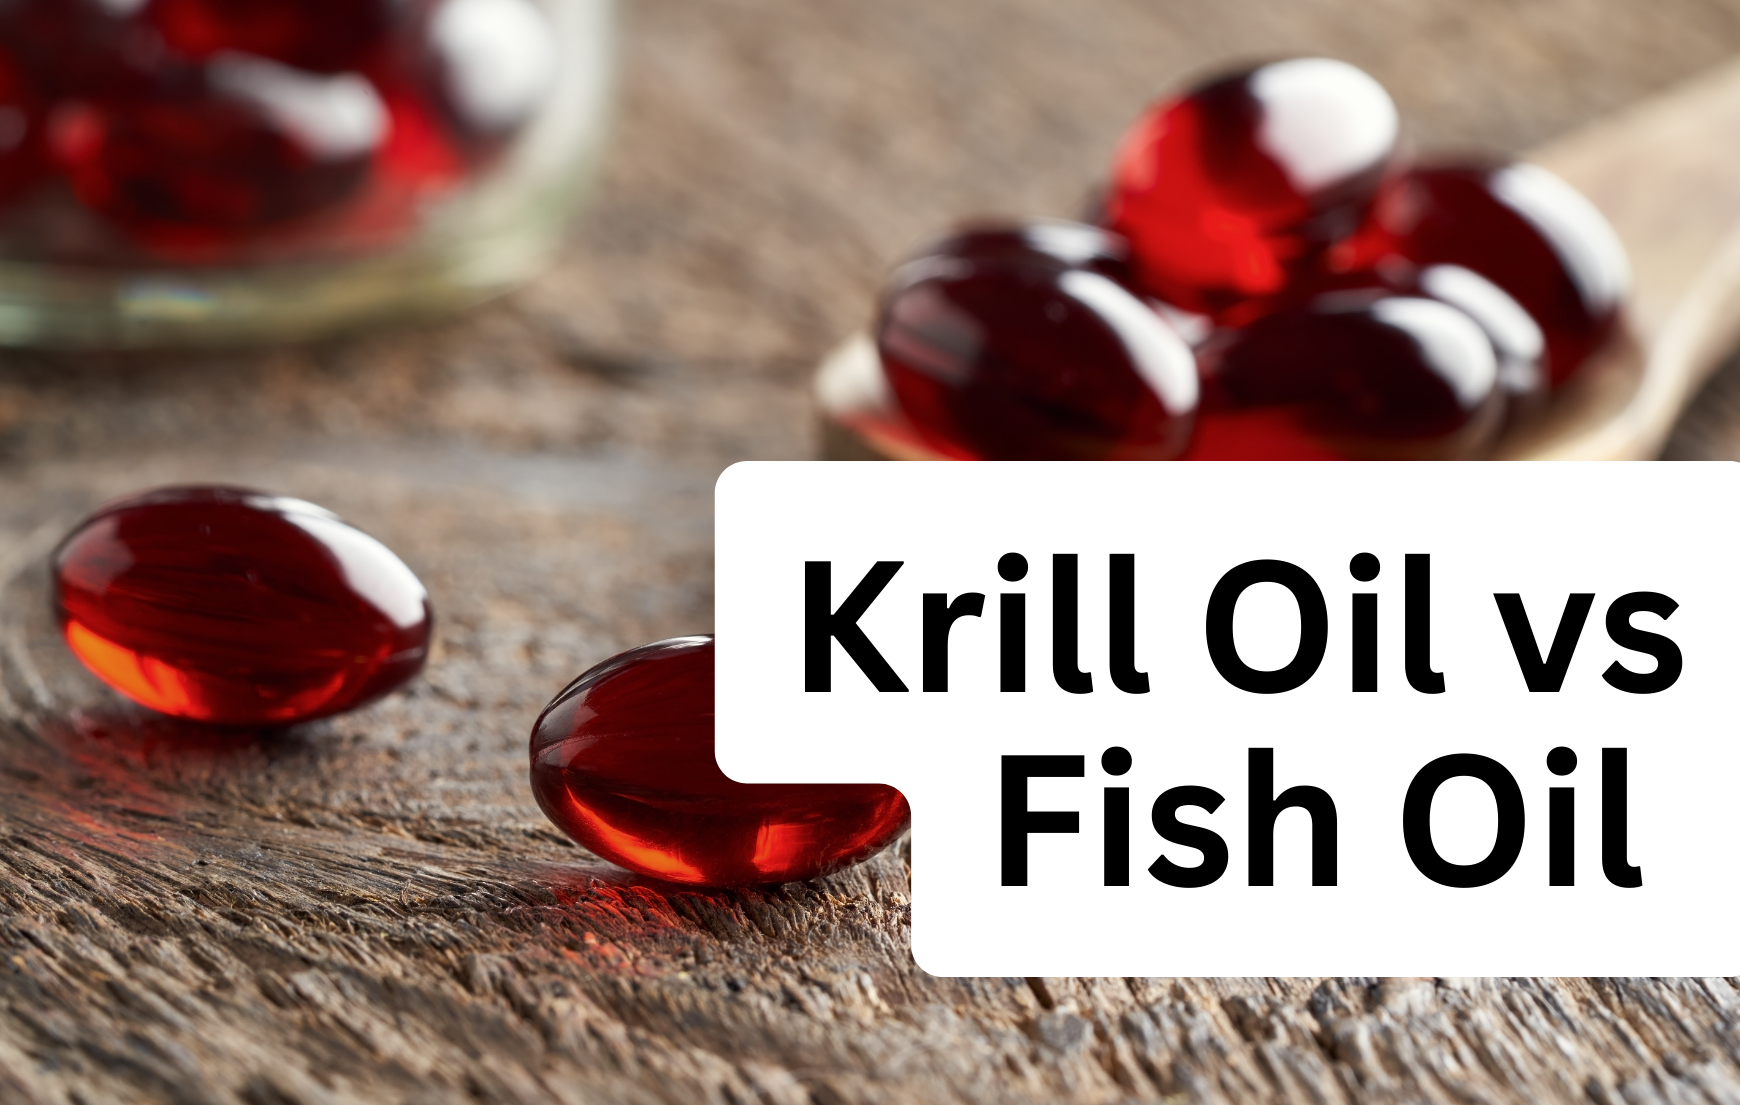 Krill Oil vs Fish Oil: What’s The Difference?